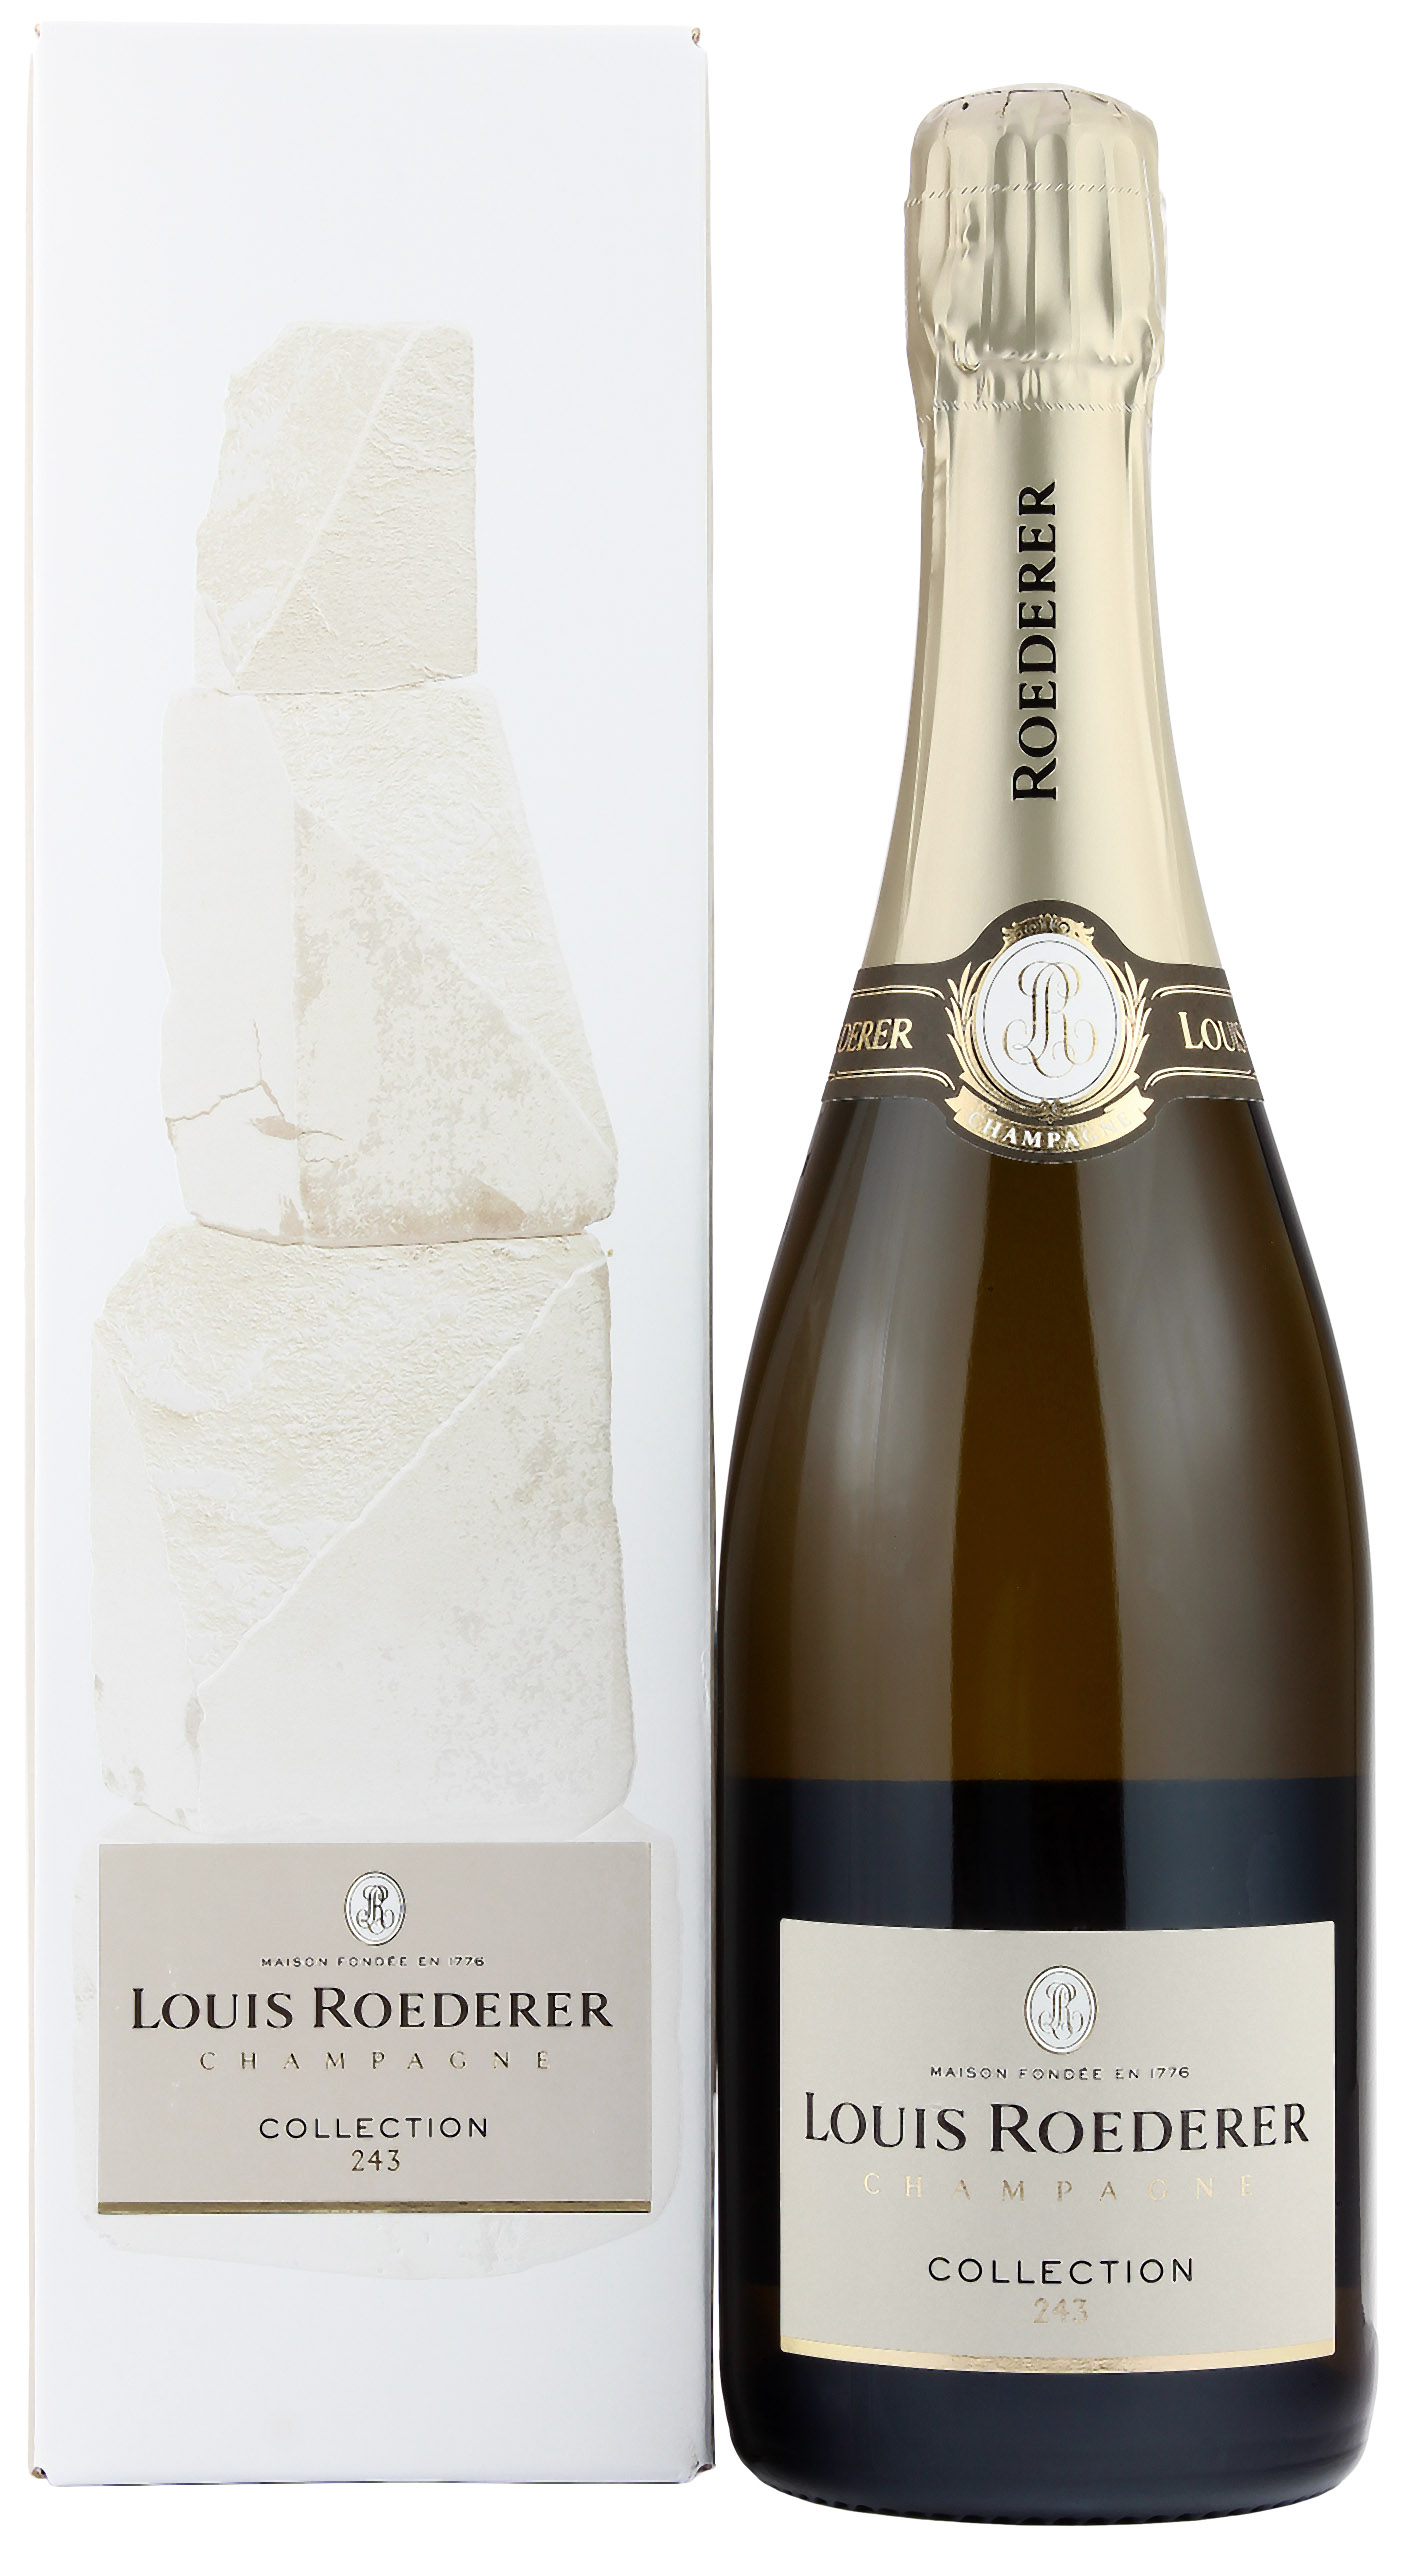 Louis Roederer Collection 243 Champagner Geschenkpackung 12.5% 0,75l